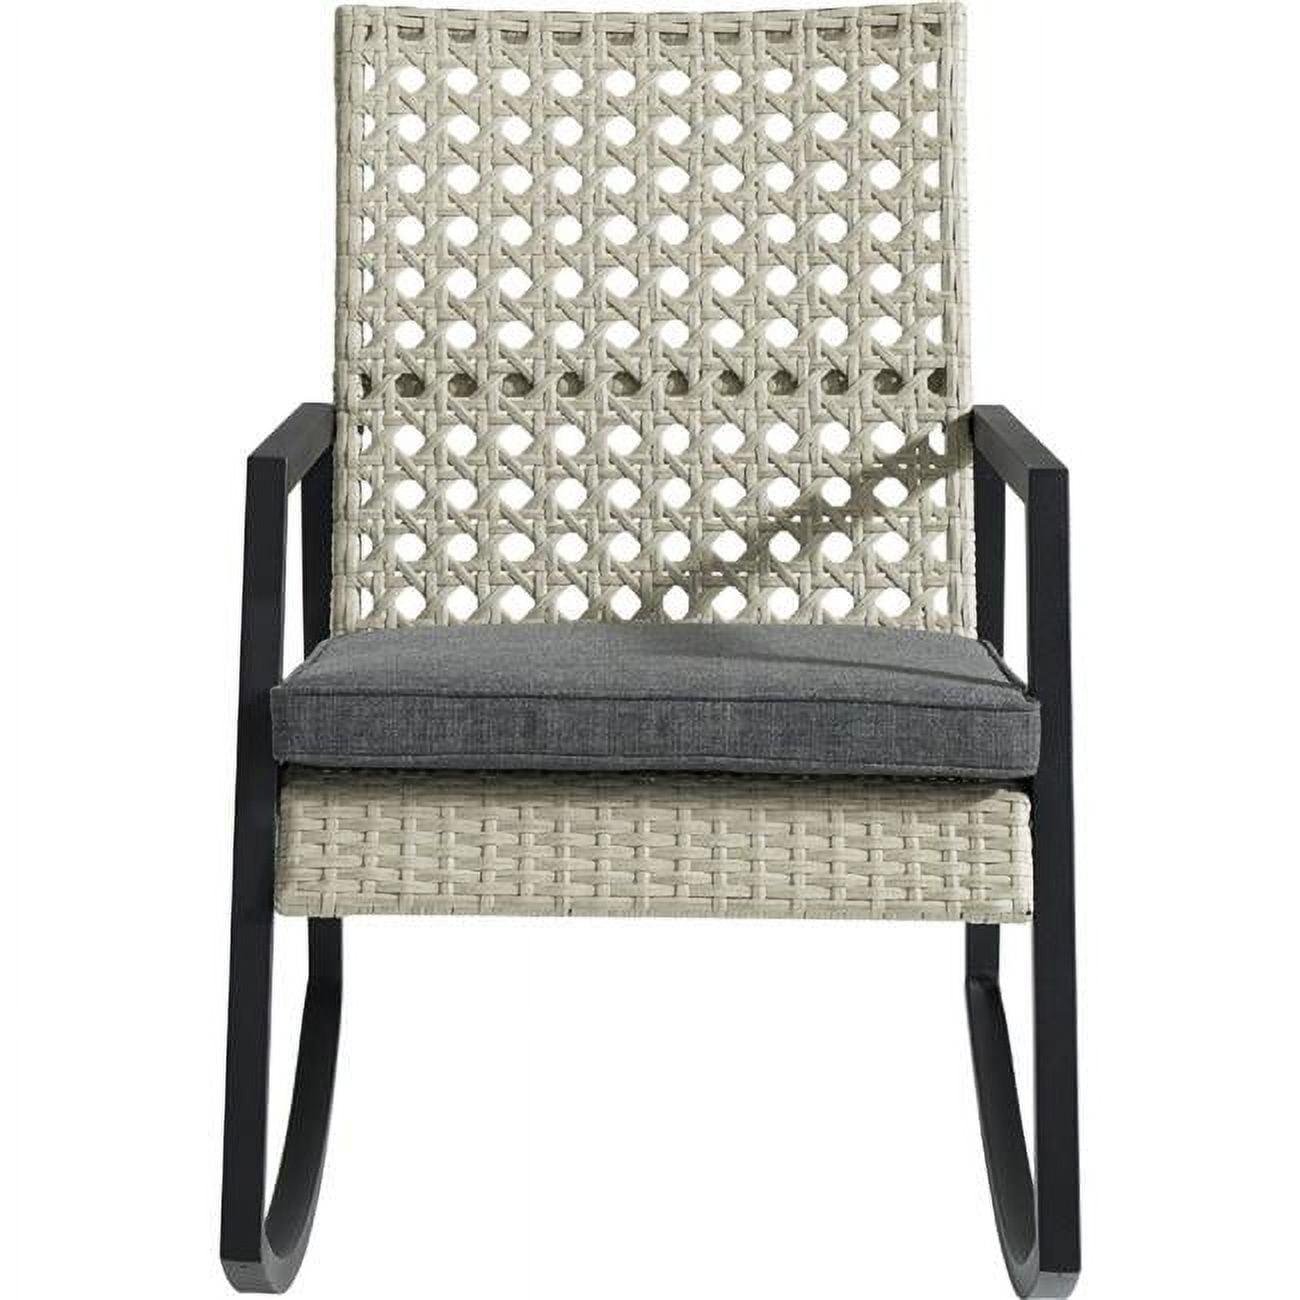 Contemporary Light Brown Rattan Patio Rocking Chair with Grey Cushion